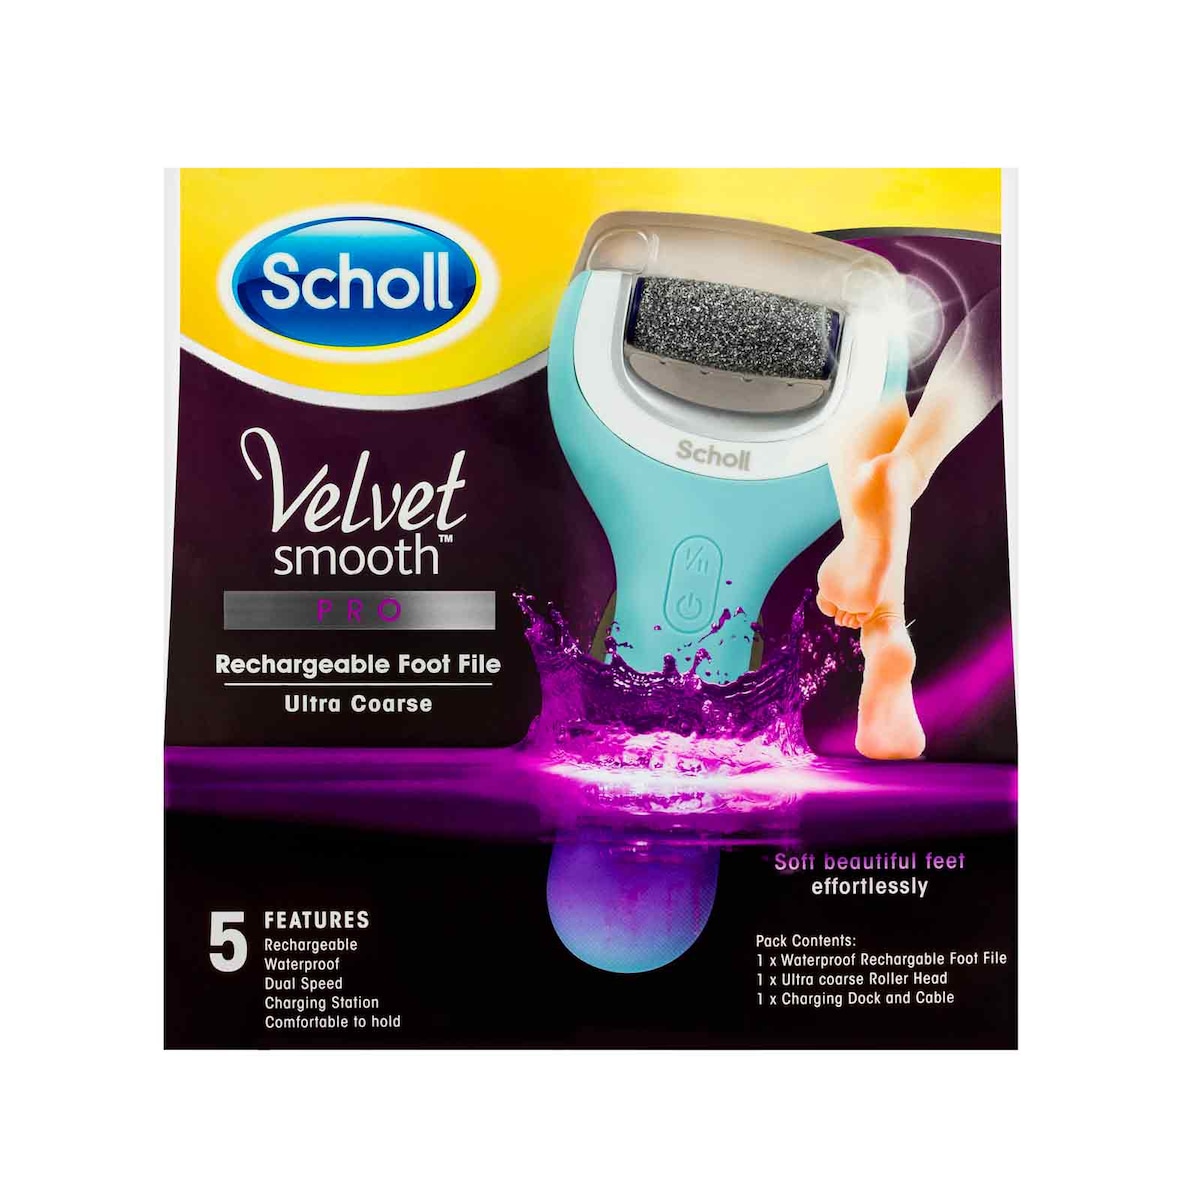 Scholl Velvet Smooth Pro Rechargable Foot File